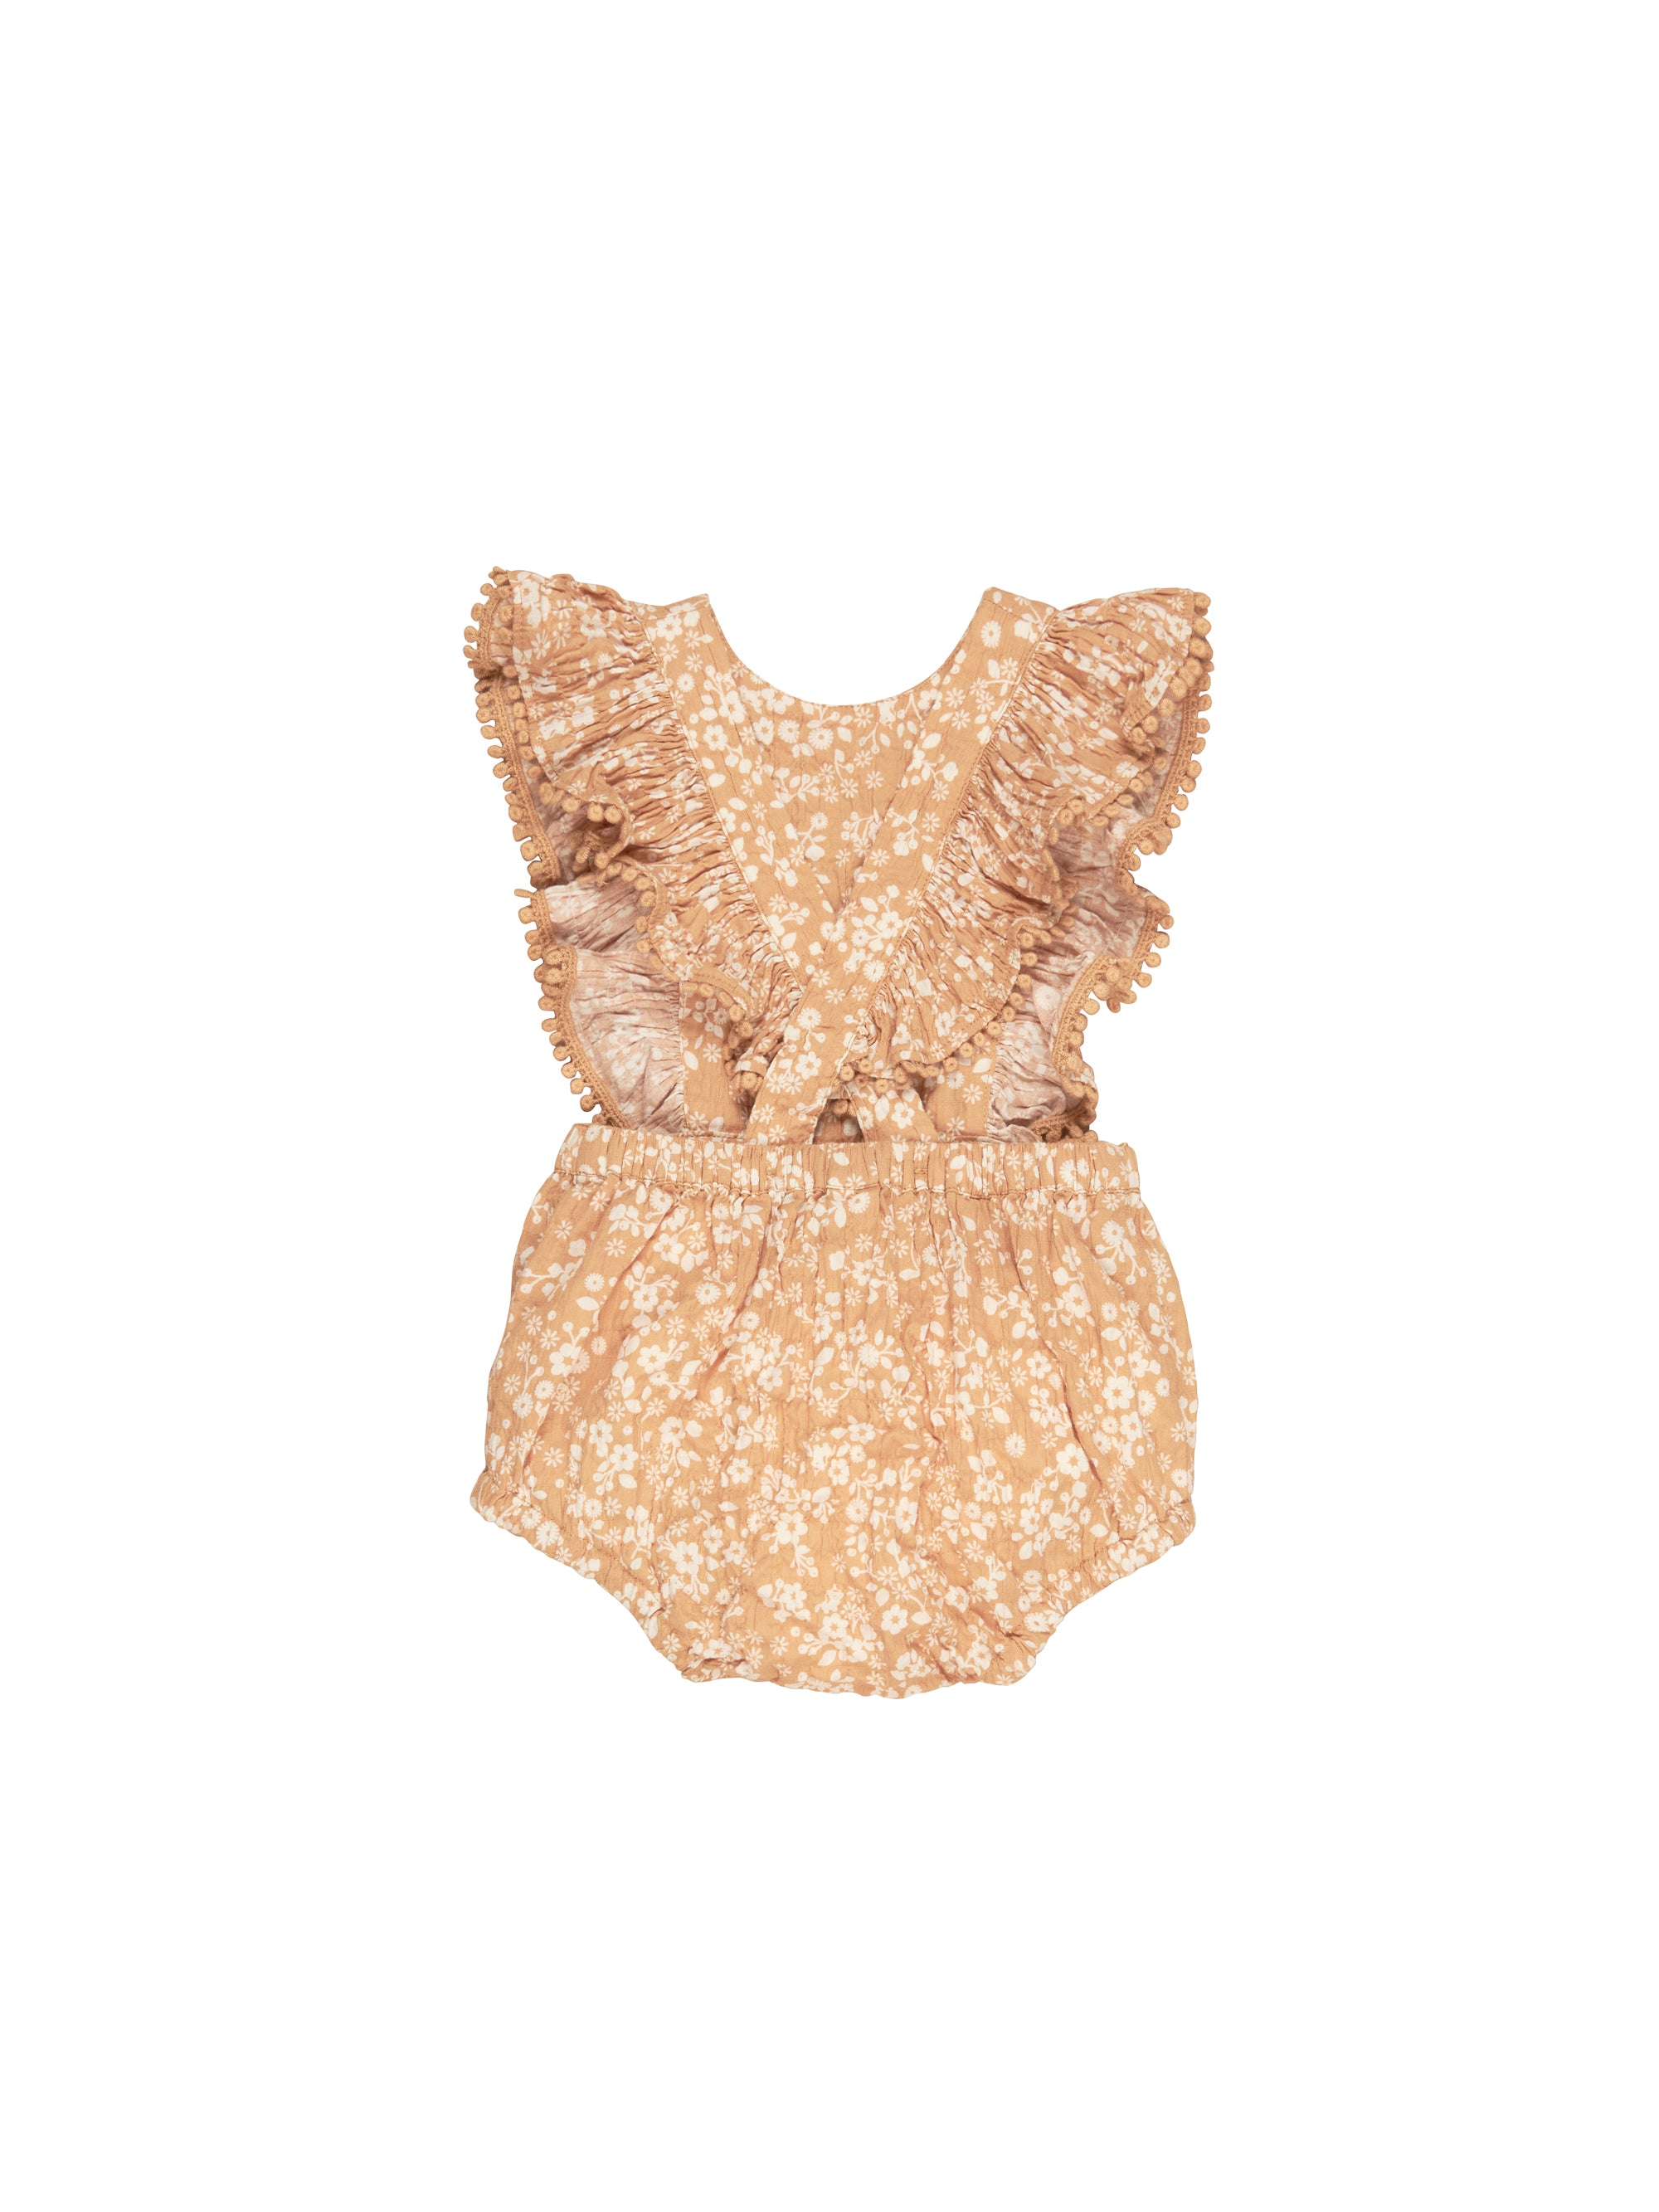 Huxbaby Floral Frill Playsuit - Warm Glow